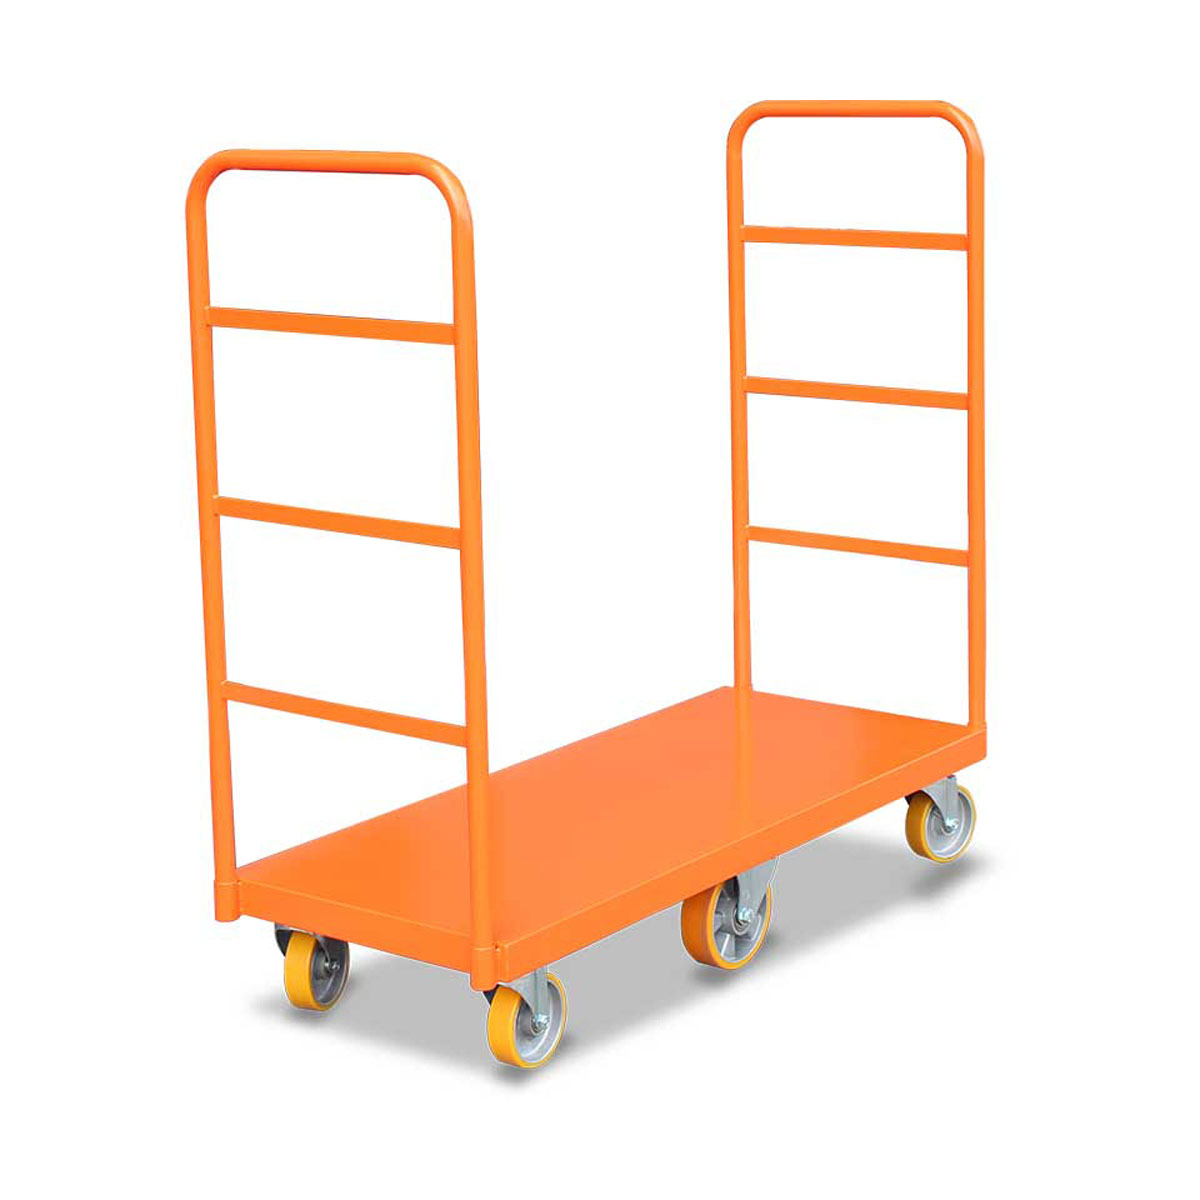 Buy Single Platform Trolley available at Astrolift NZ